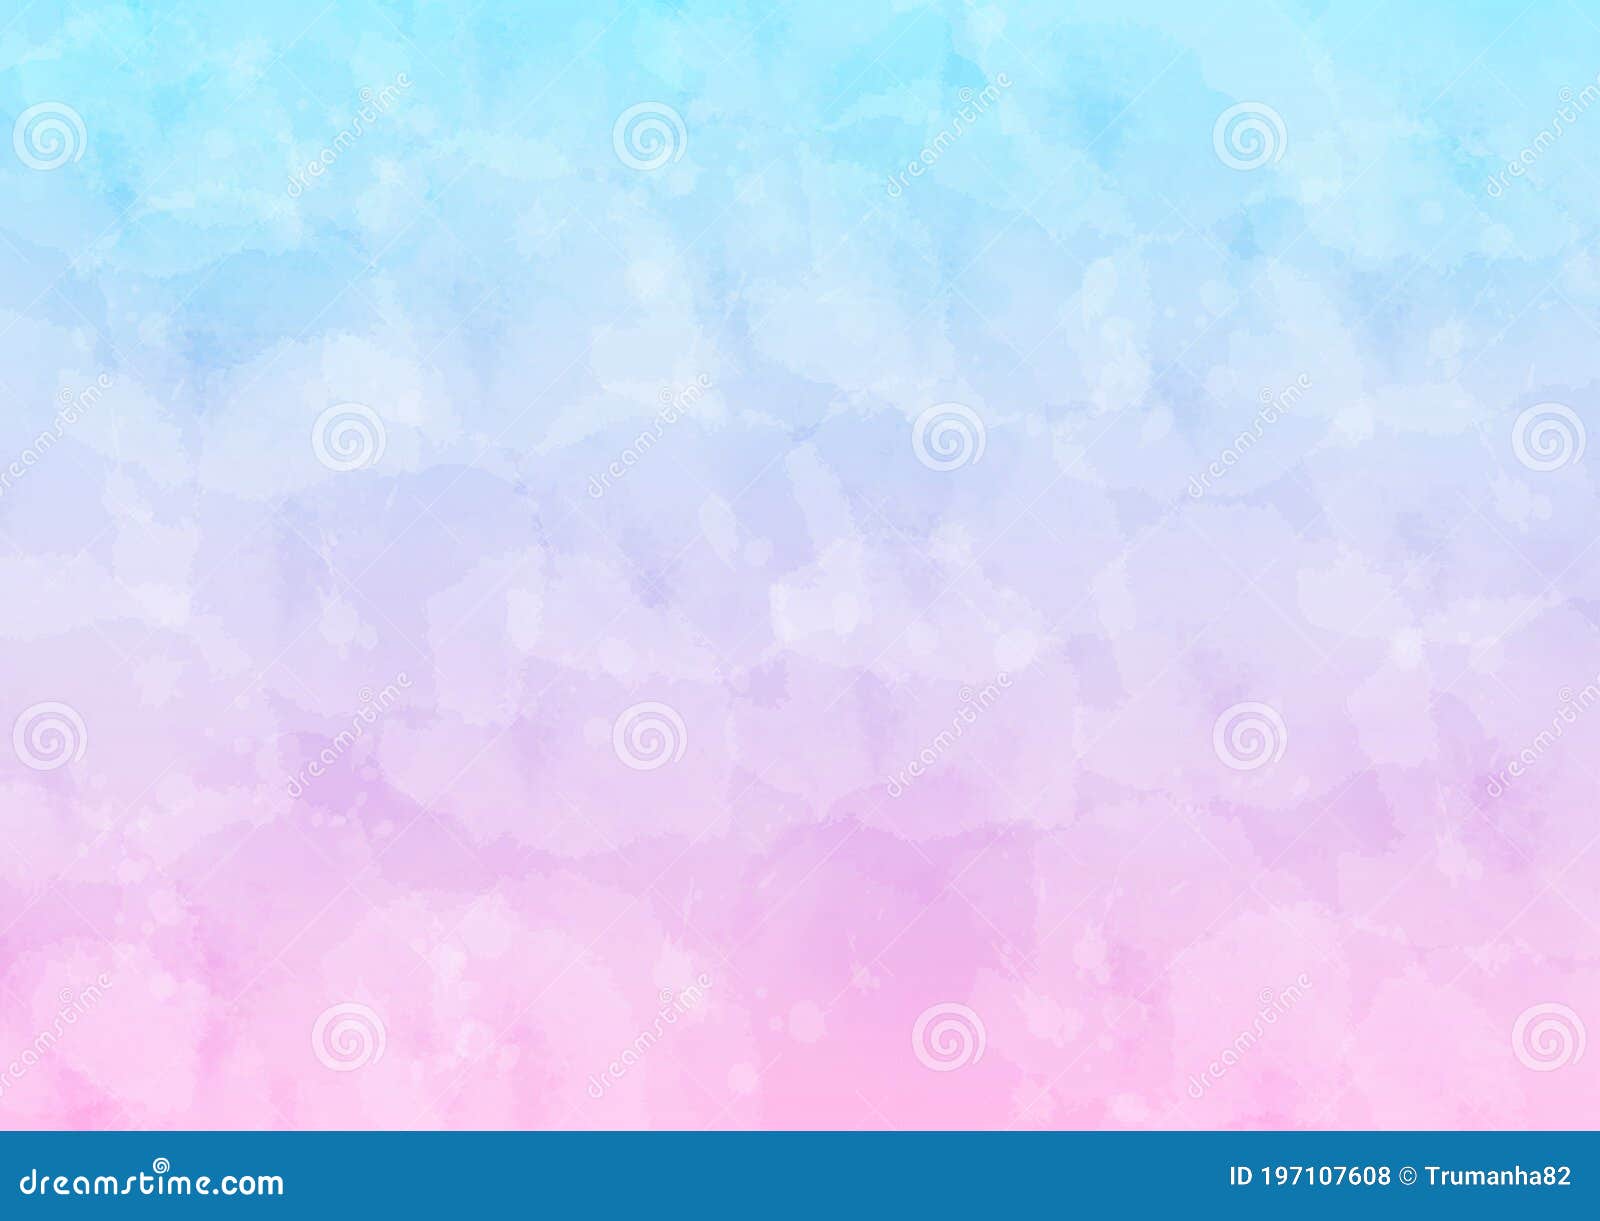  pastel blue and pink abstract background with watercolor pattern